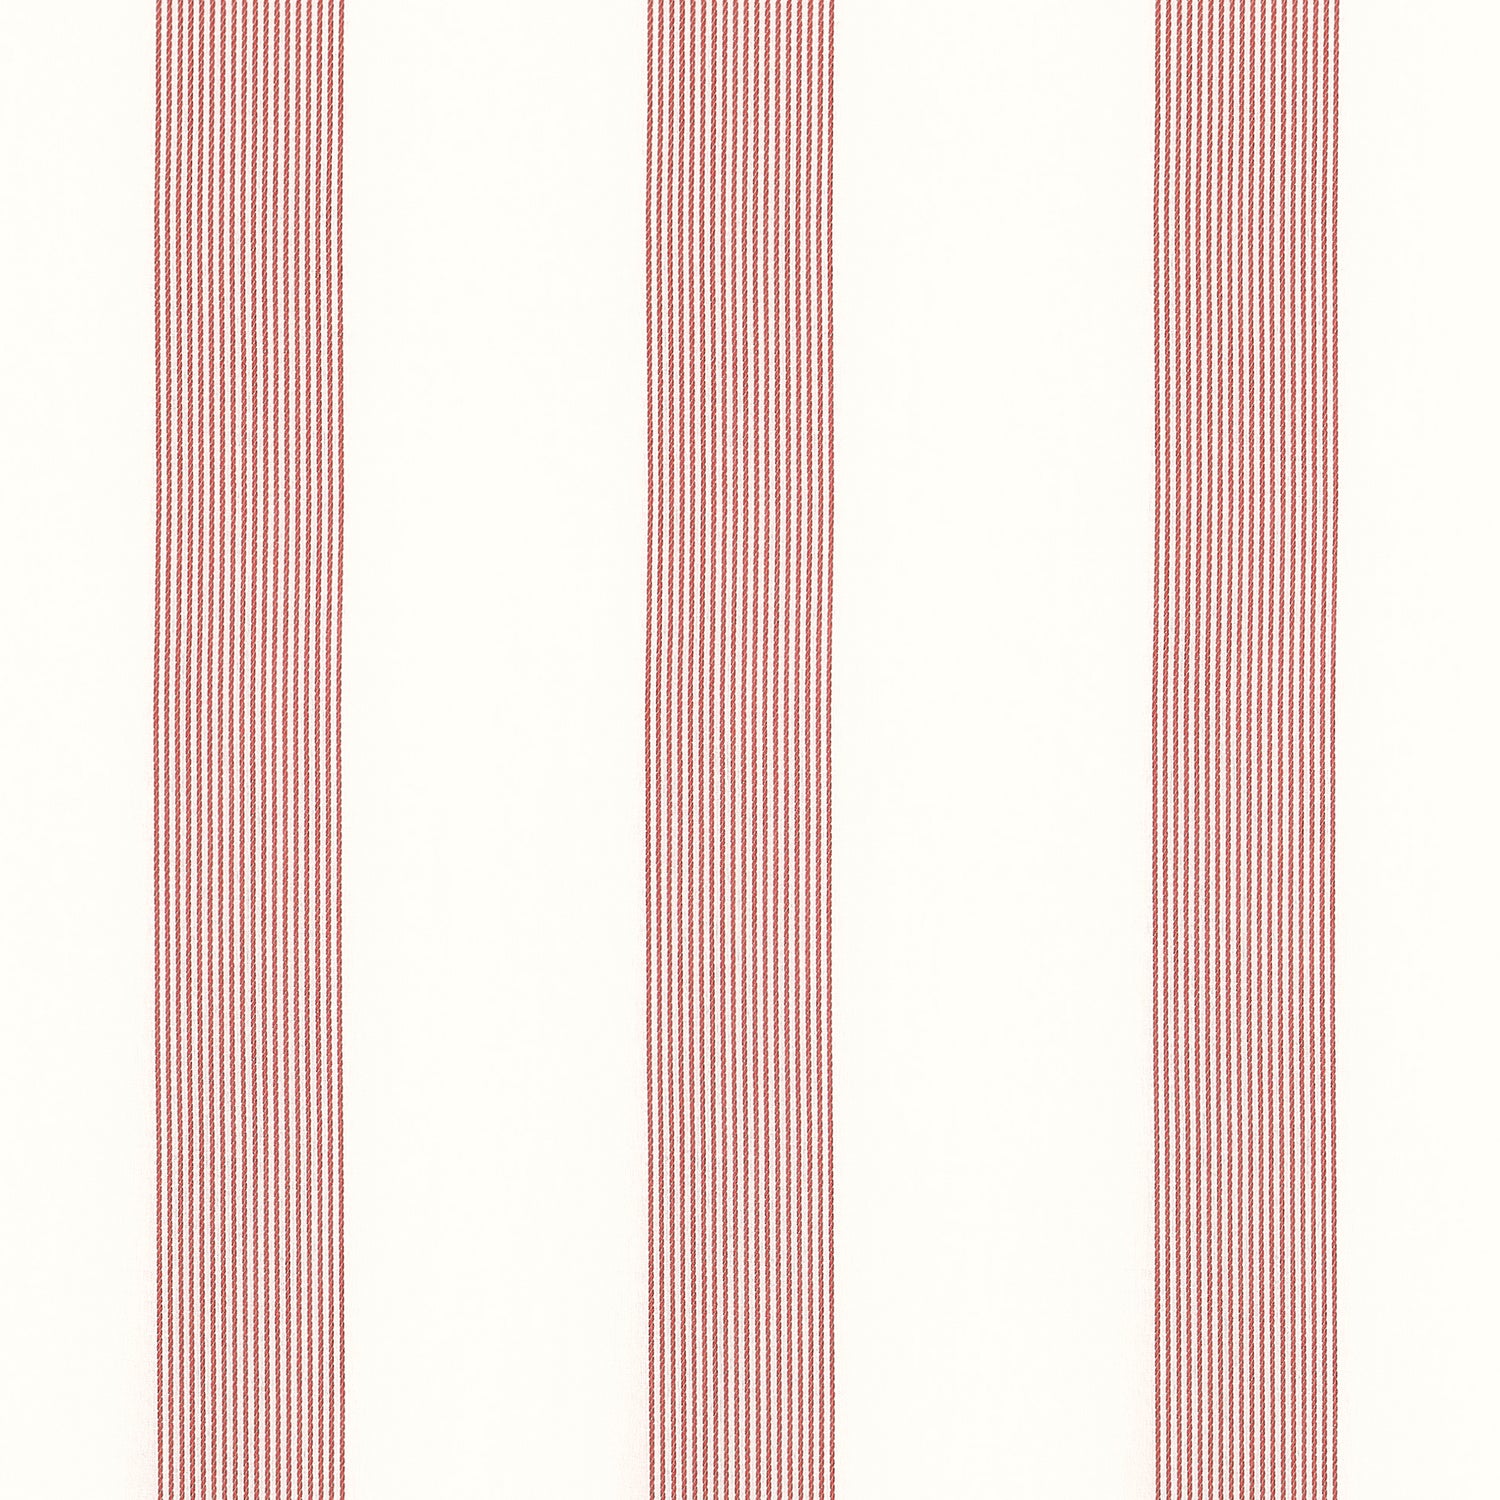 Sabine fabric in stripe cranberry color - pattern number FWW81734 - by Thibaut in the Locale Wide Width collection